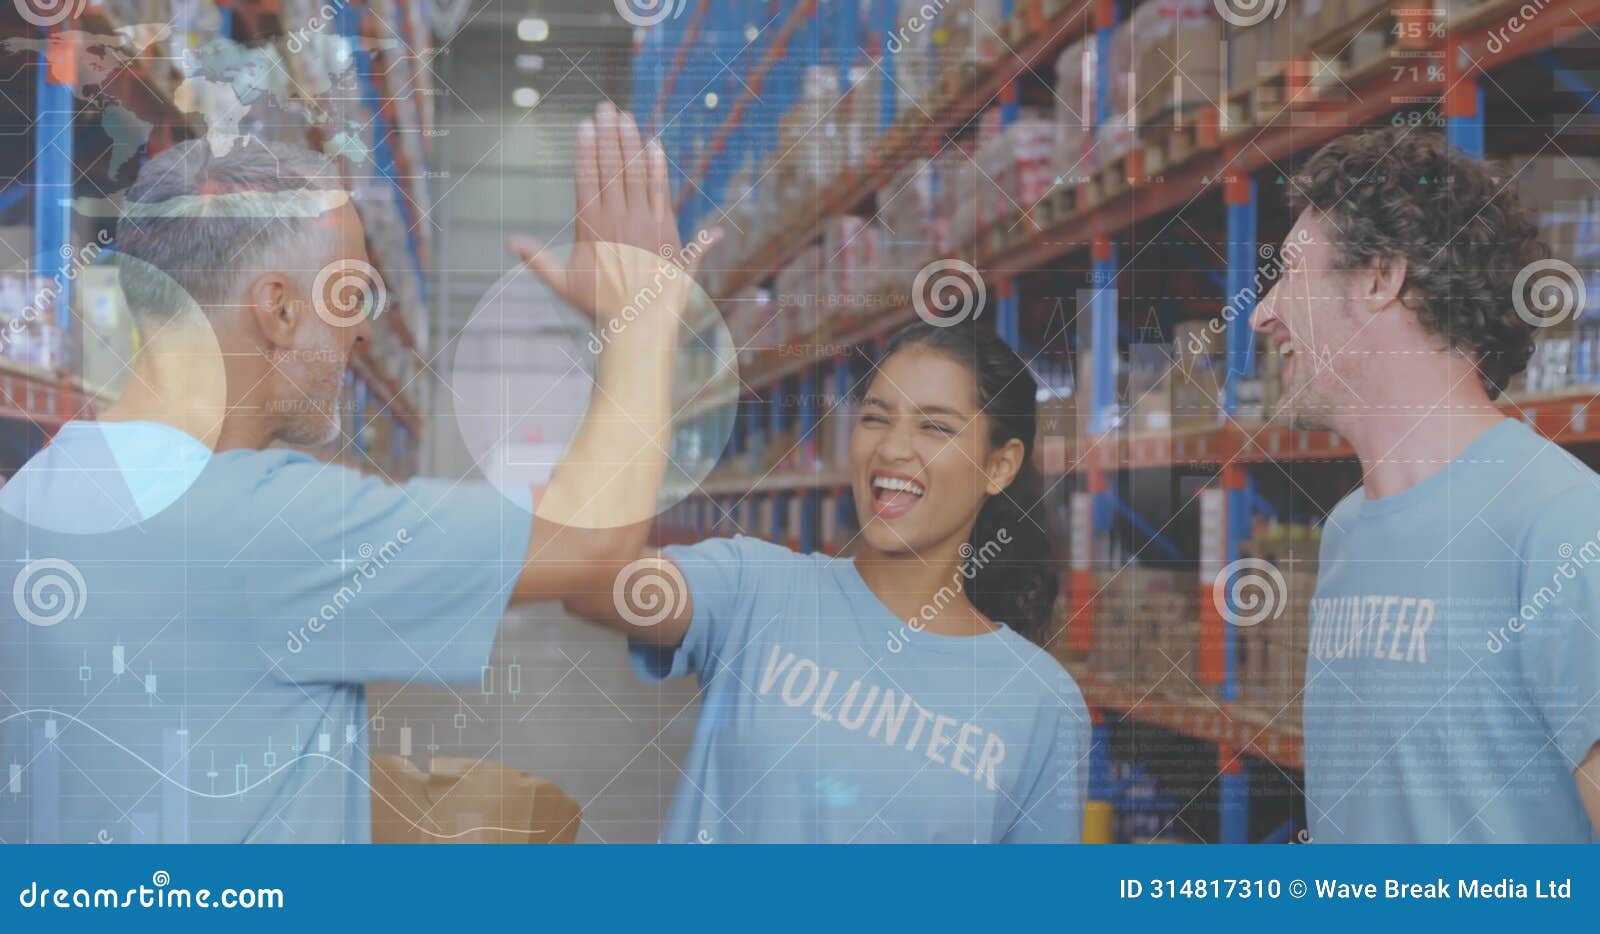 image of statistics and data processing over diverse volunteers high fiving in warehouse